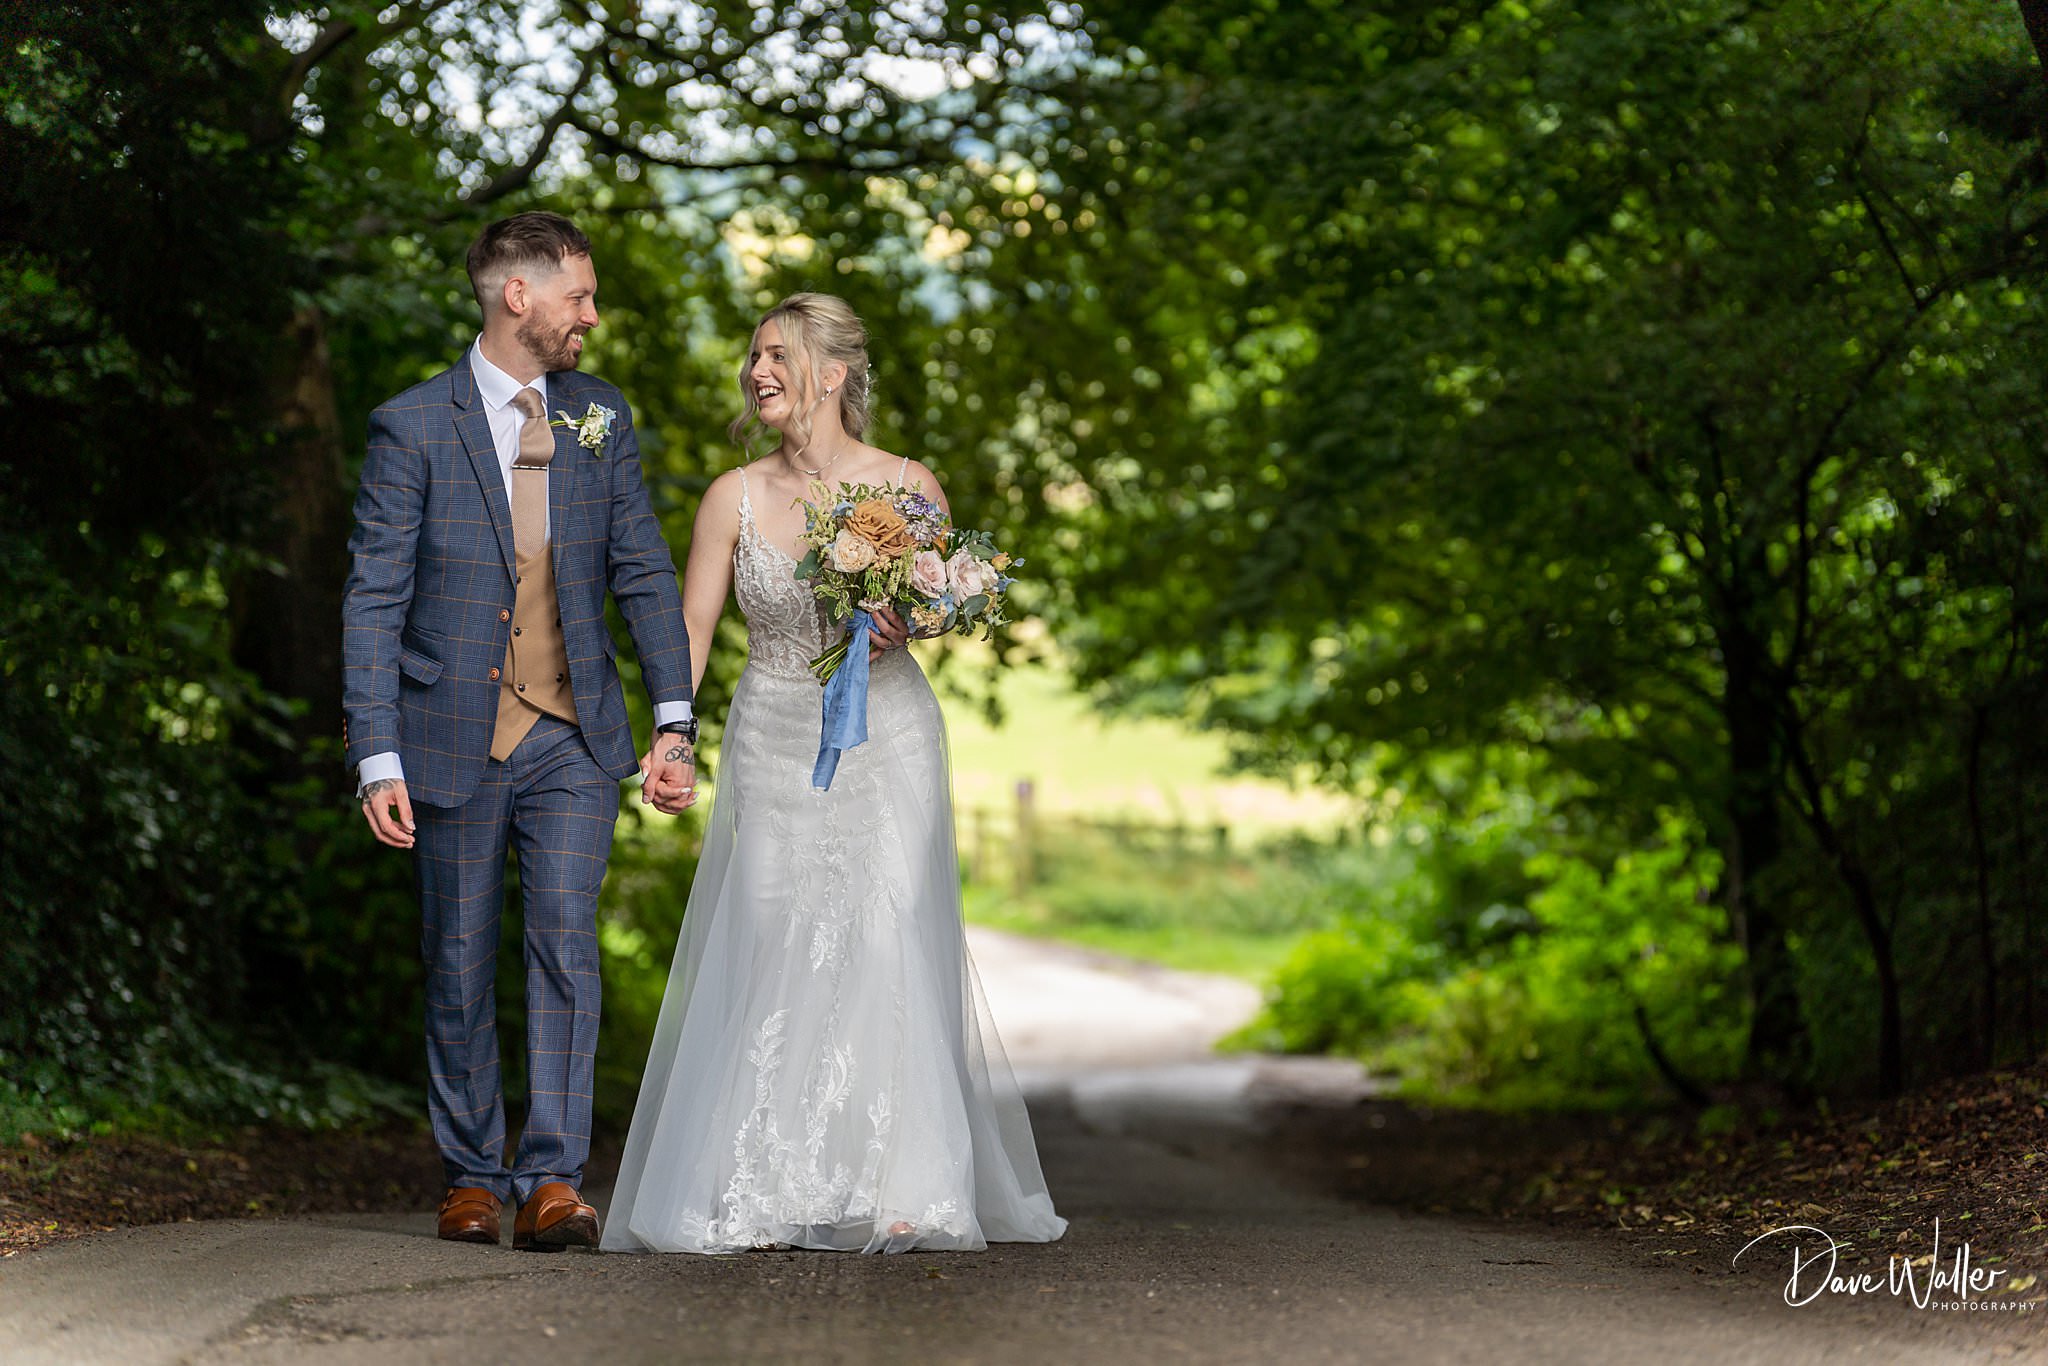 Danielle & David, a joyful bride and groom holding hands and walking down a sun-dappled country lane at East Riddlesden Hall, surrounded by lush greenery, sharing a moment of laughter